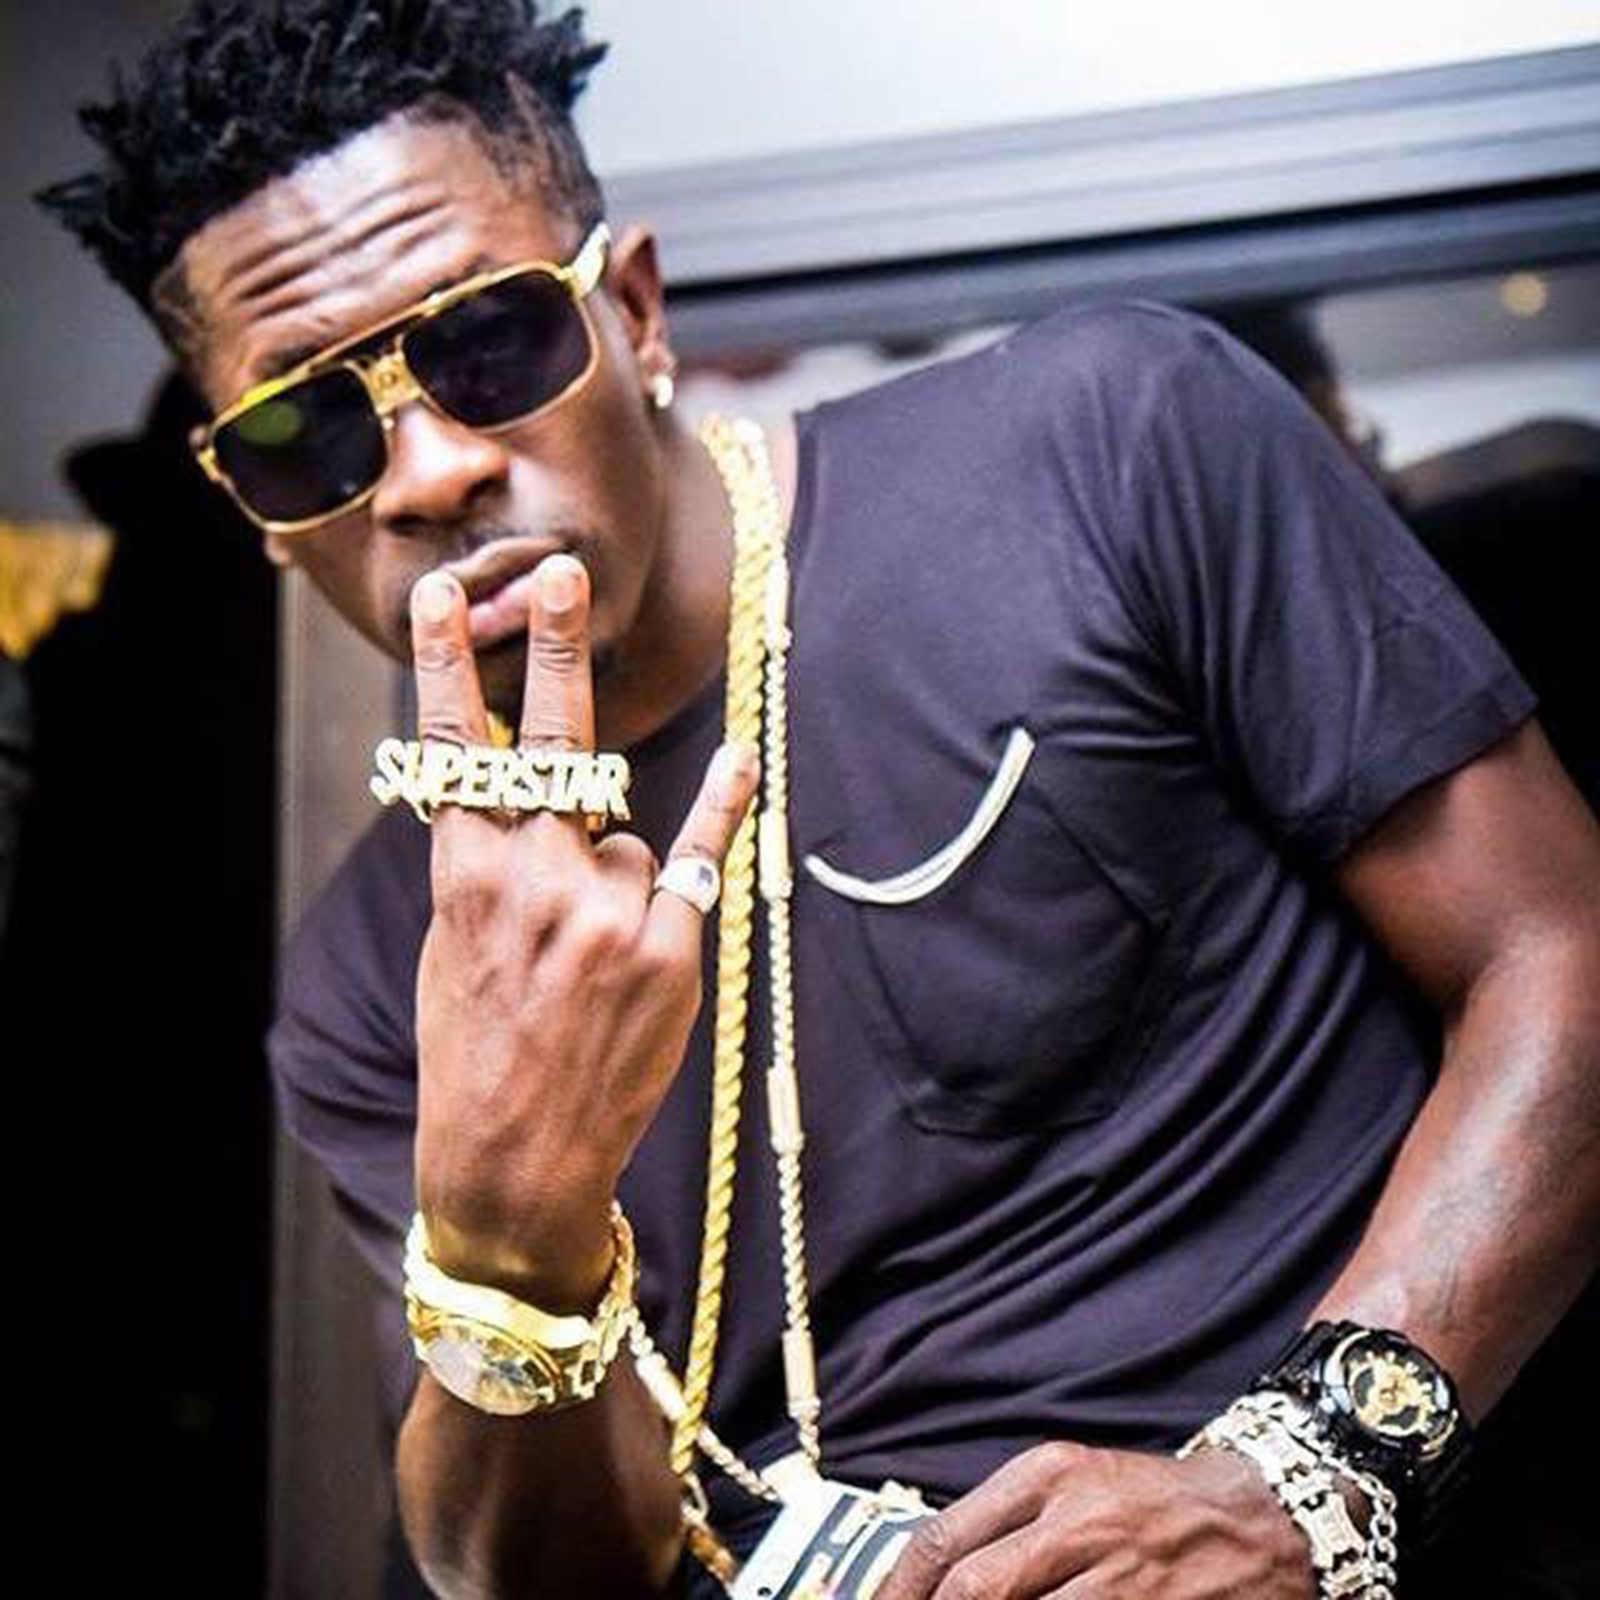 Parade (Freestyle) by Shatta Wale